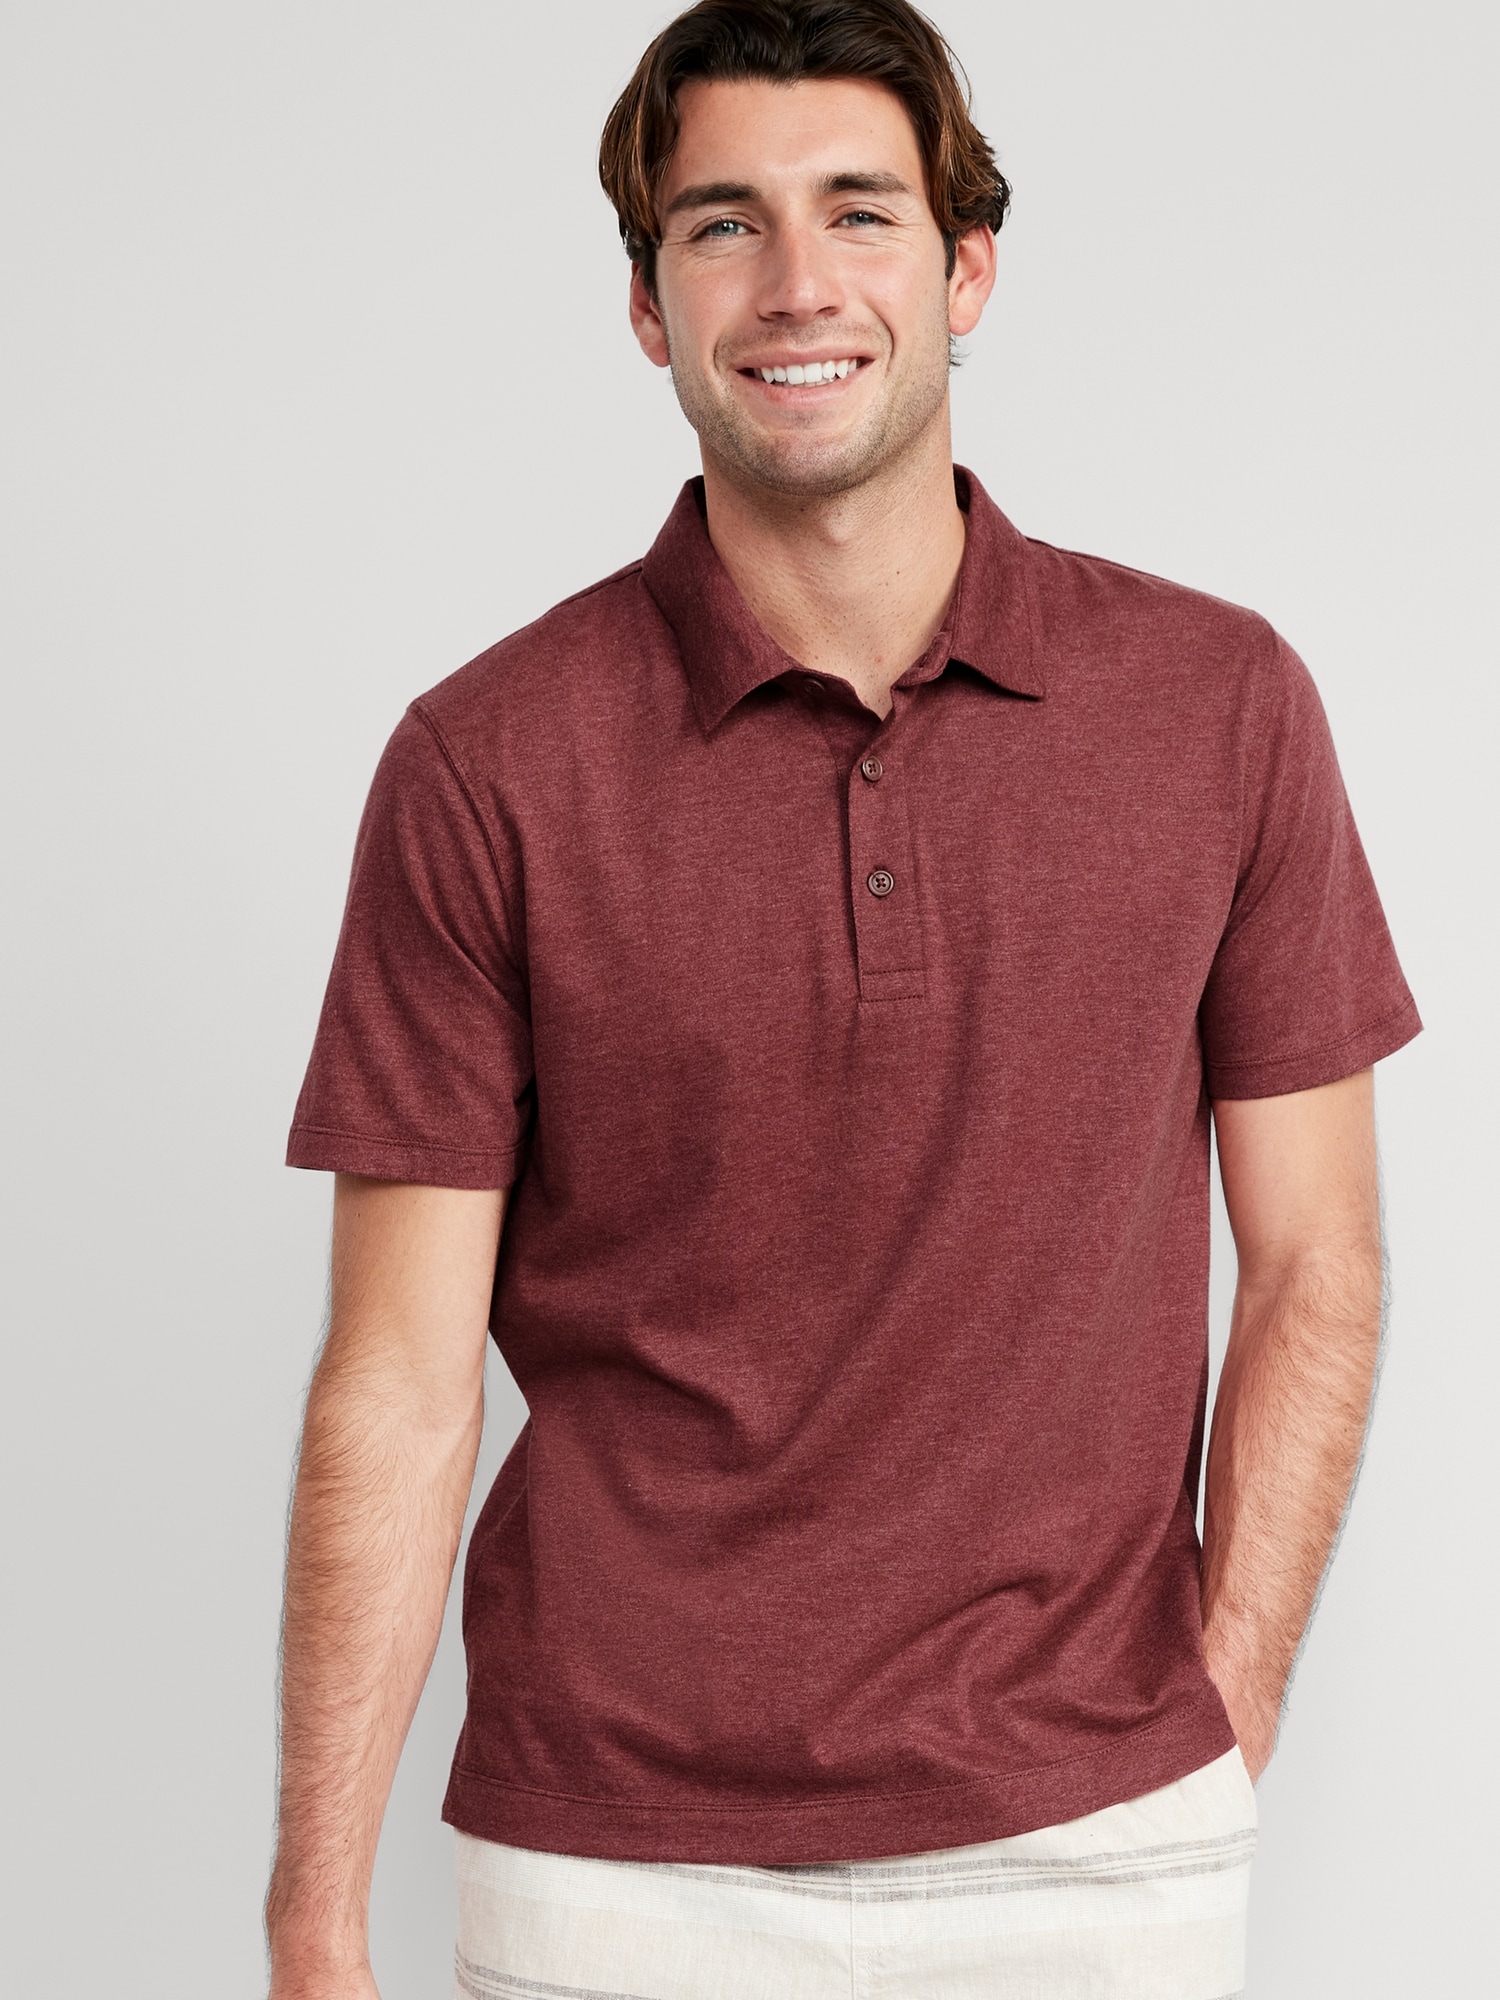 Old Navy Classic Fit Jersey Polo for Men multi. 1